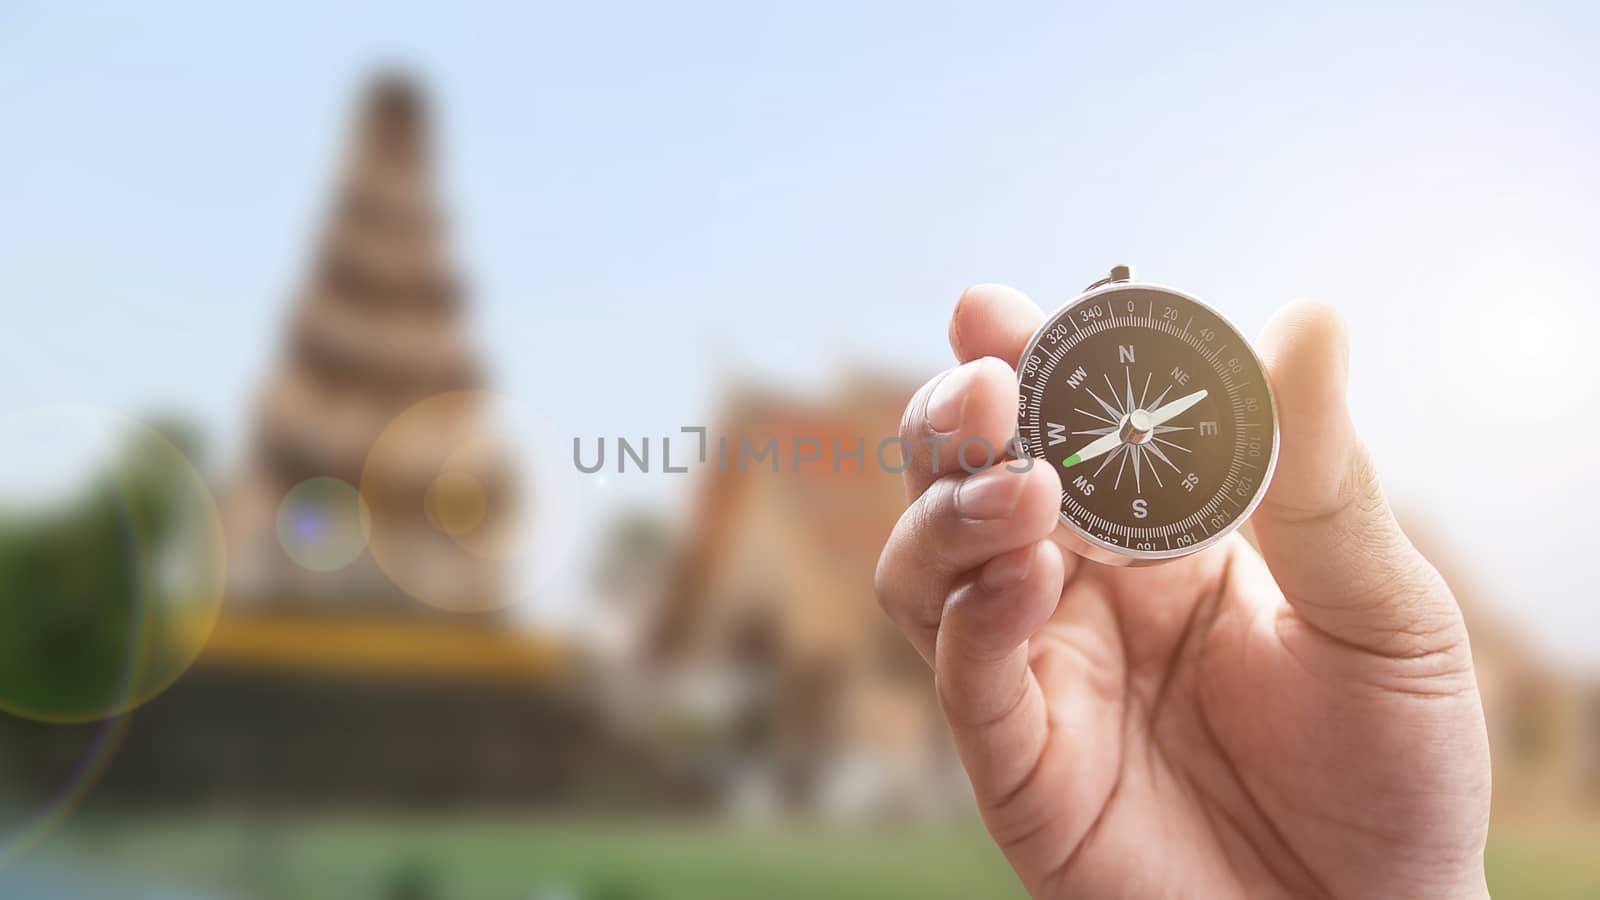 compass in hand on thai temple blur background with lighting fla by rakoptonLPN